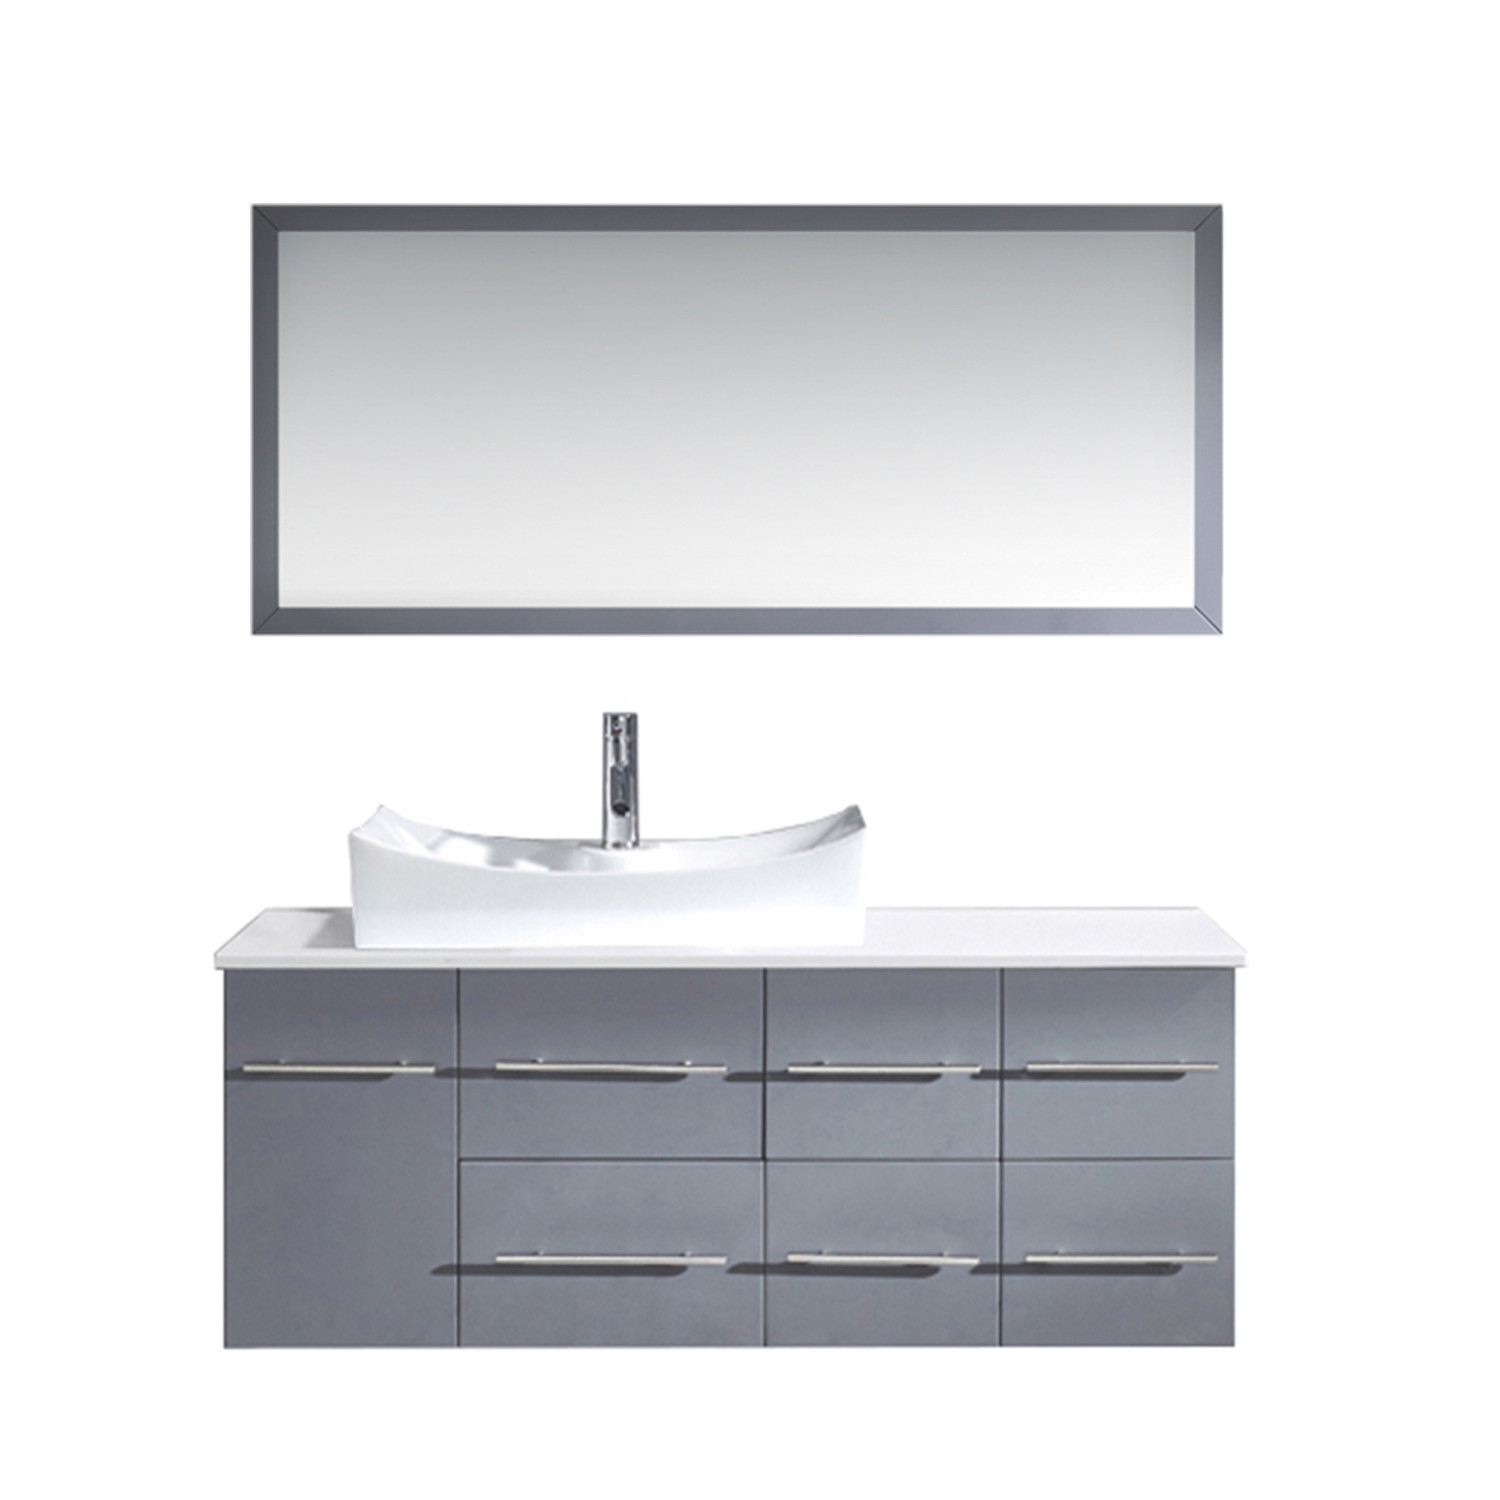 Virtu MS-430-S-GR Ceanna 53.5" Single Bath Vanity in Gray with White Engineered Stone Top and Sink